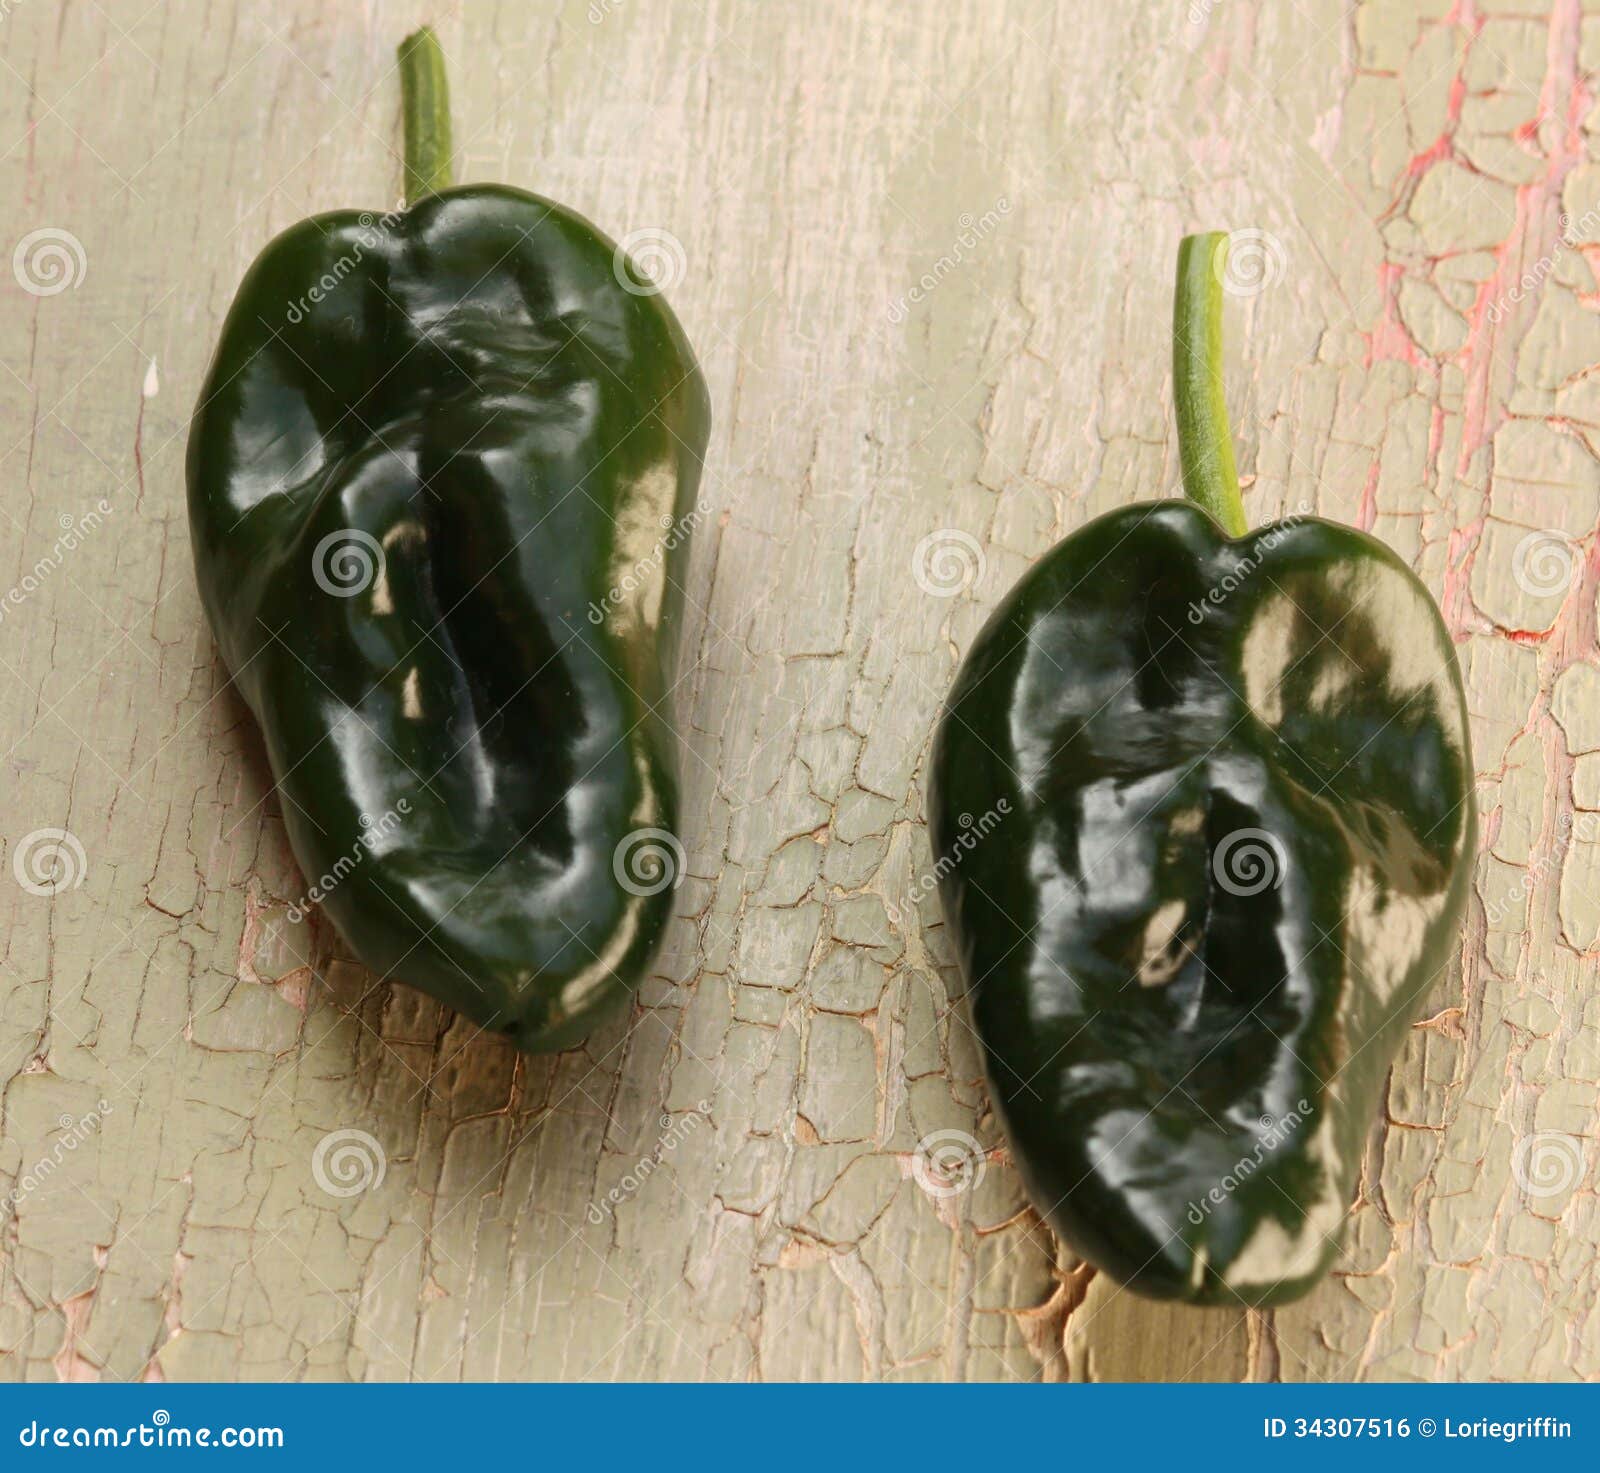 poblano chili peppers